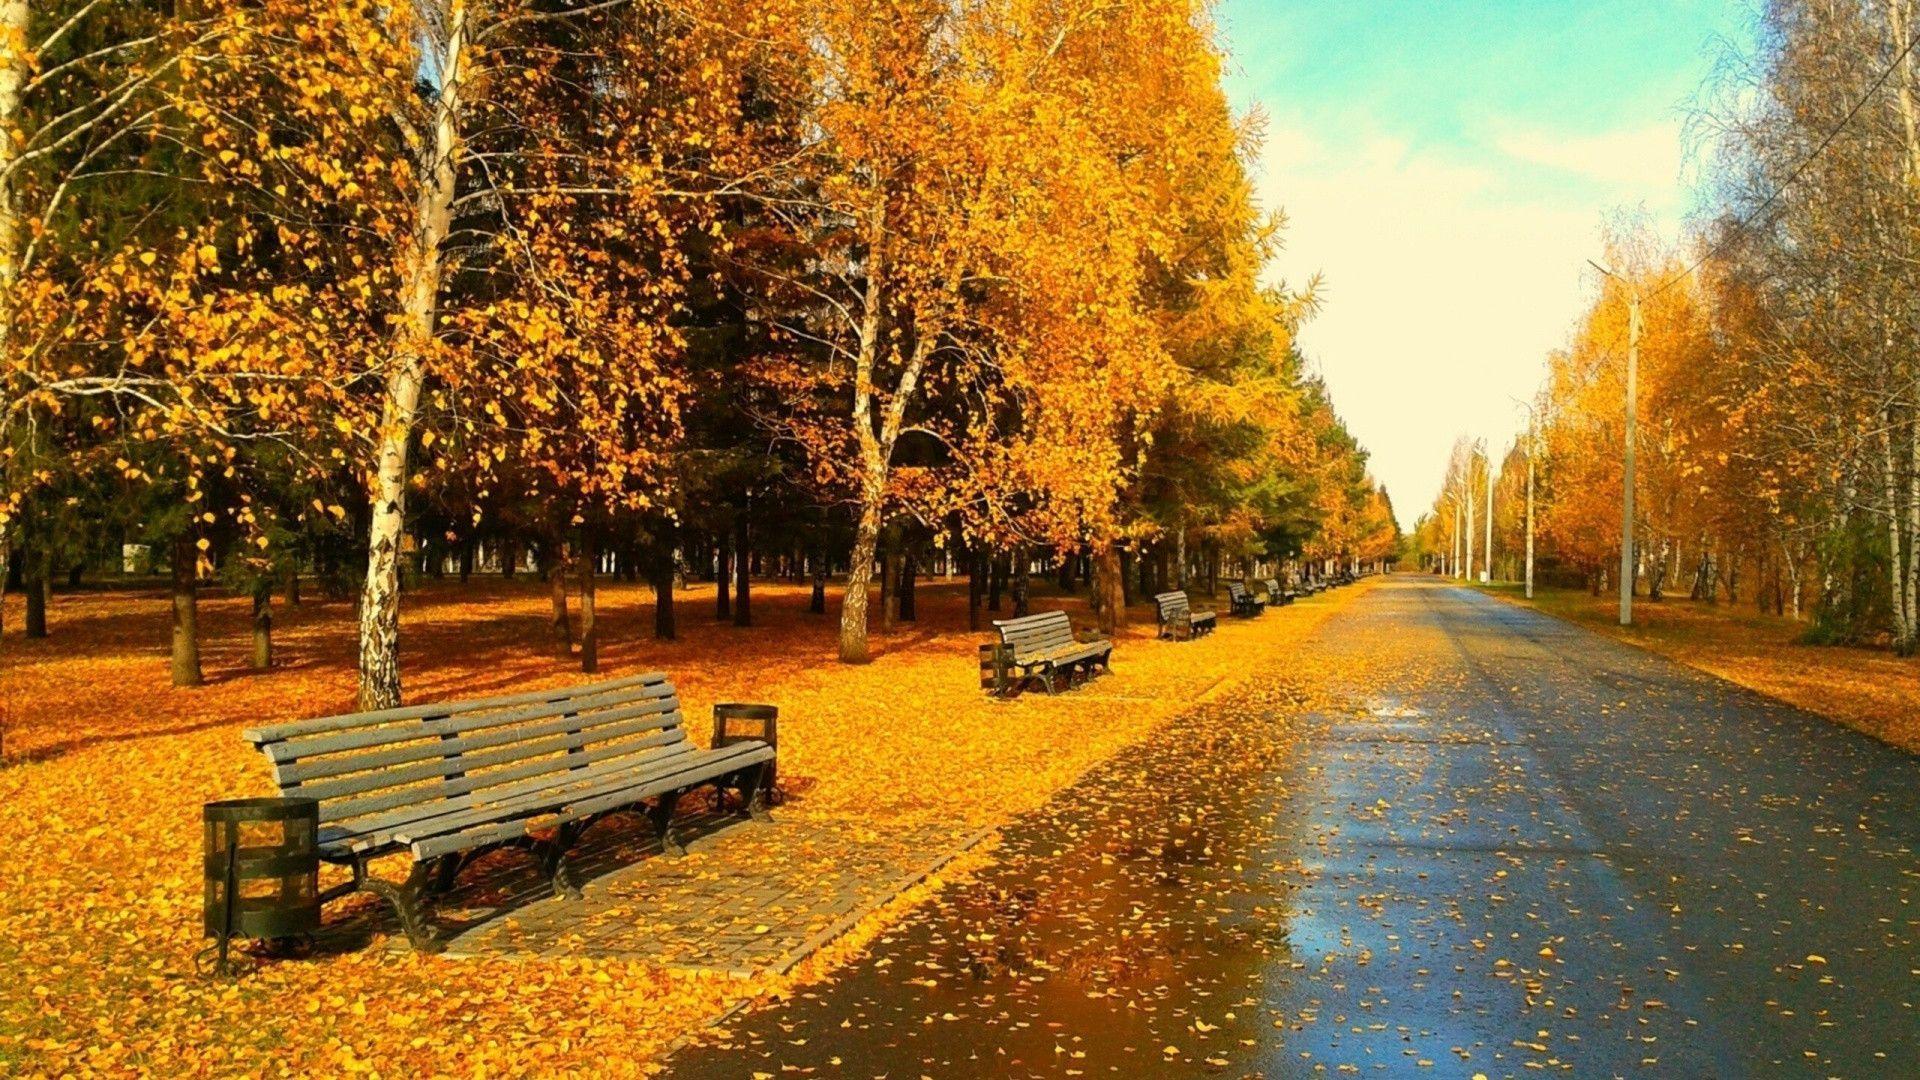 Road At Autumn Day Wallpaper, iPhone Wallpaper, Facebook Cover